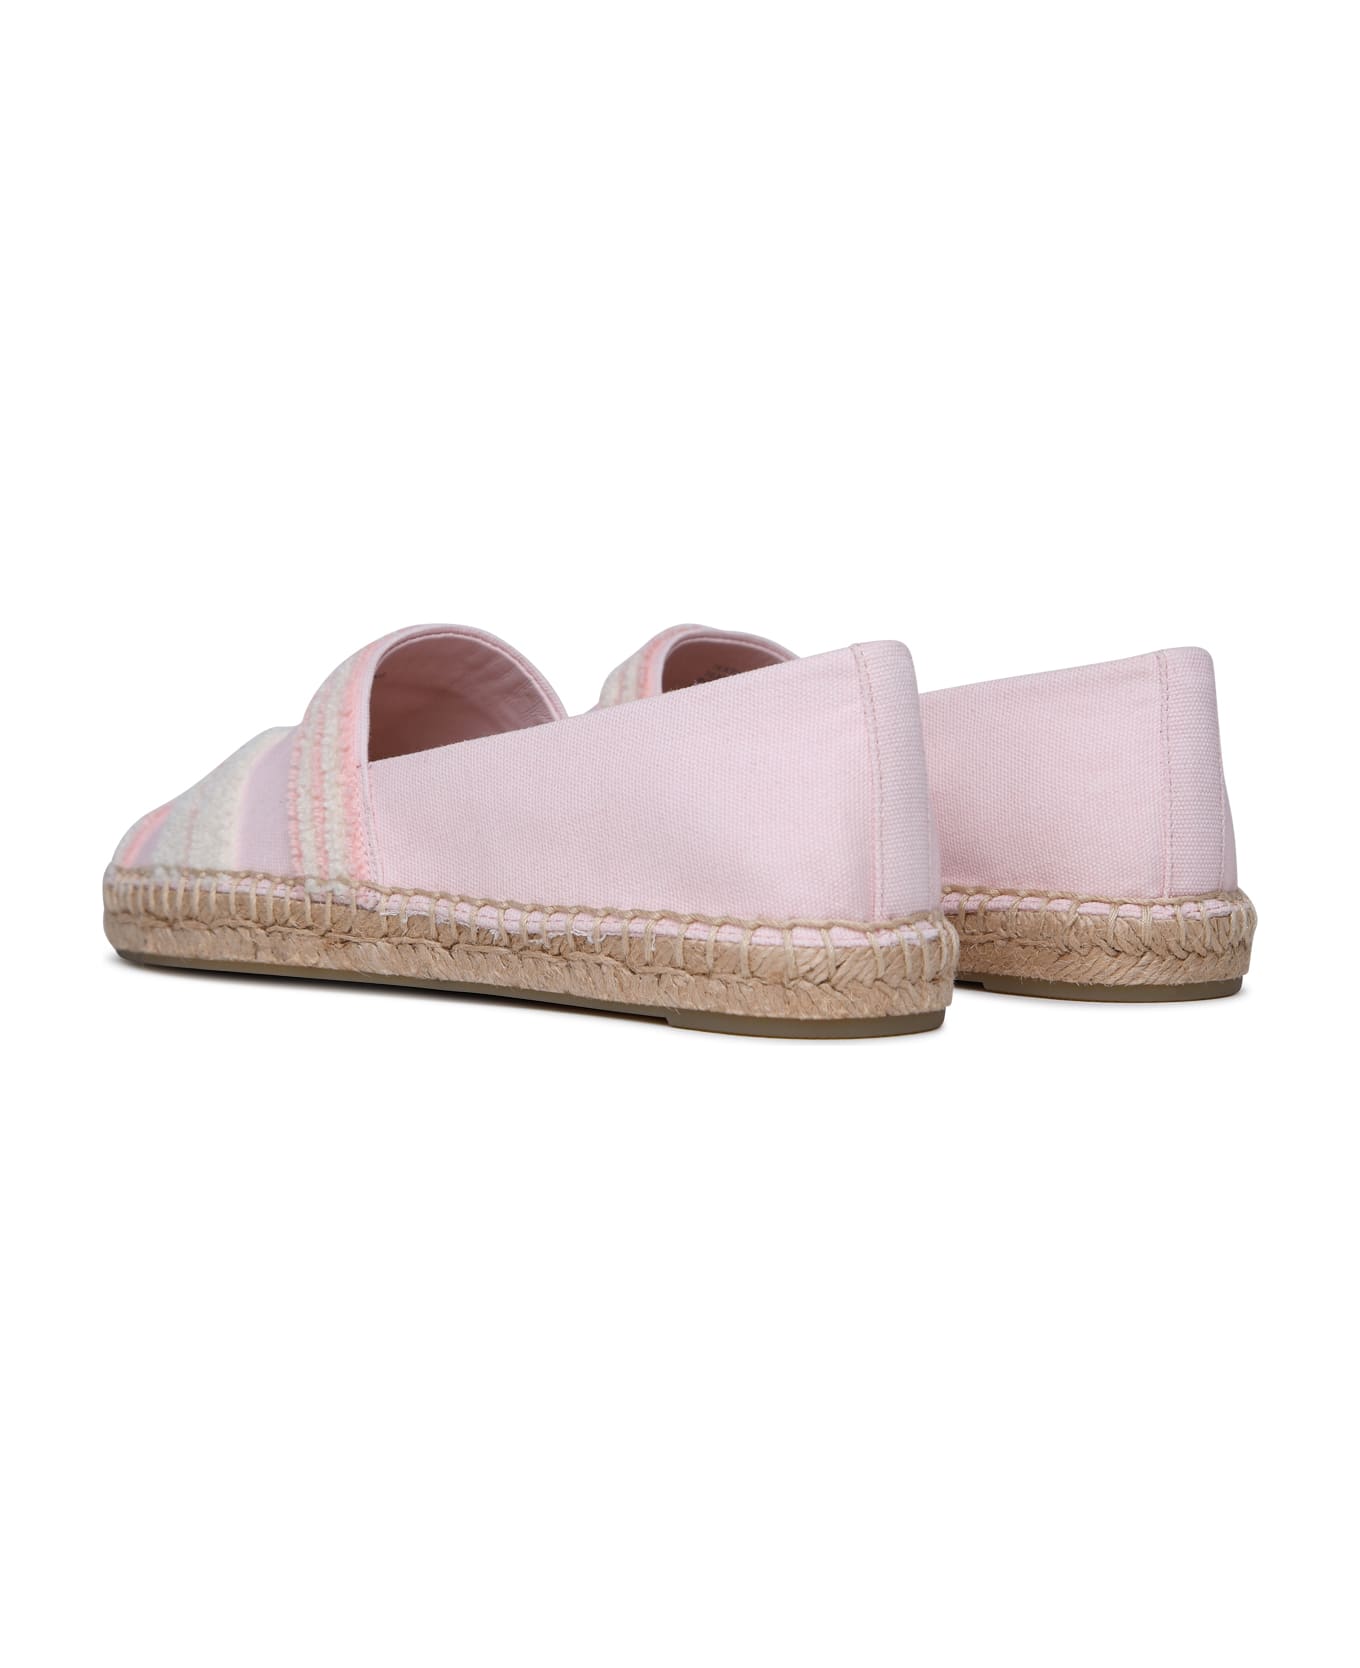 Tory Burch Double T Espadrilles - Pink